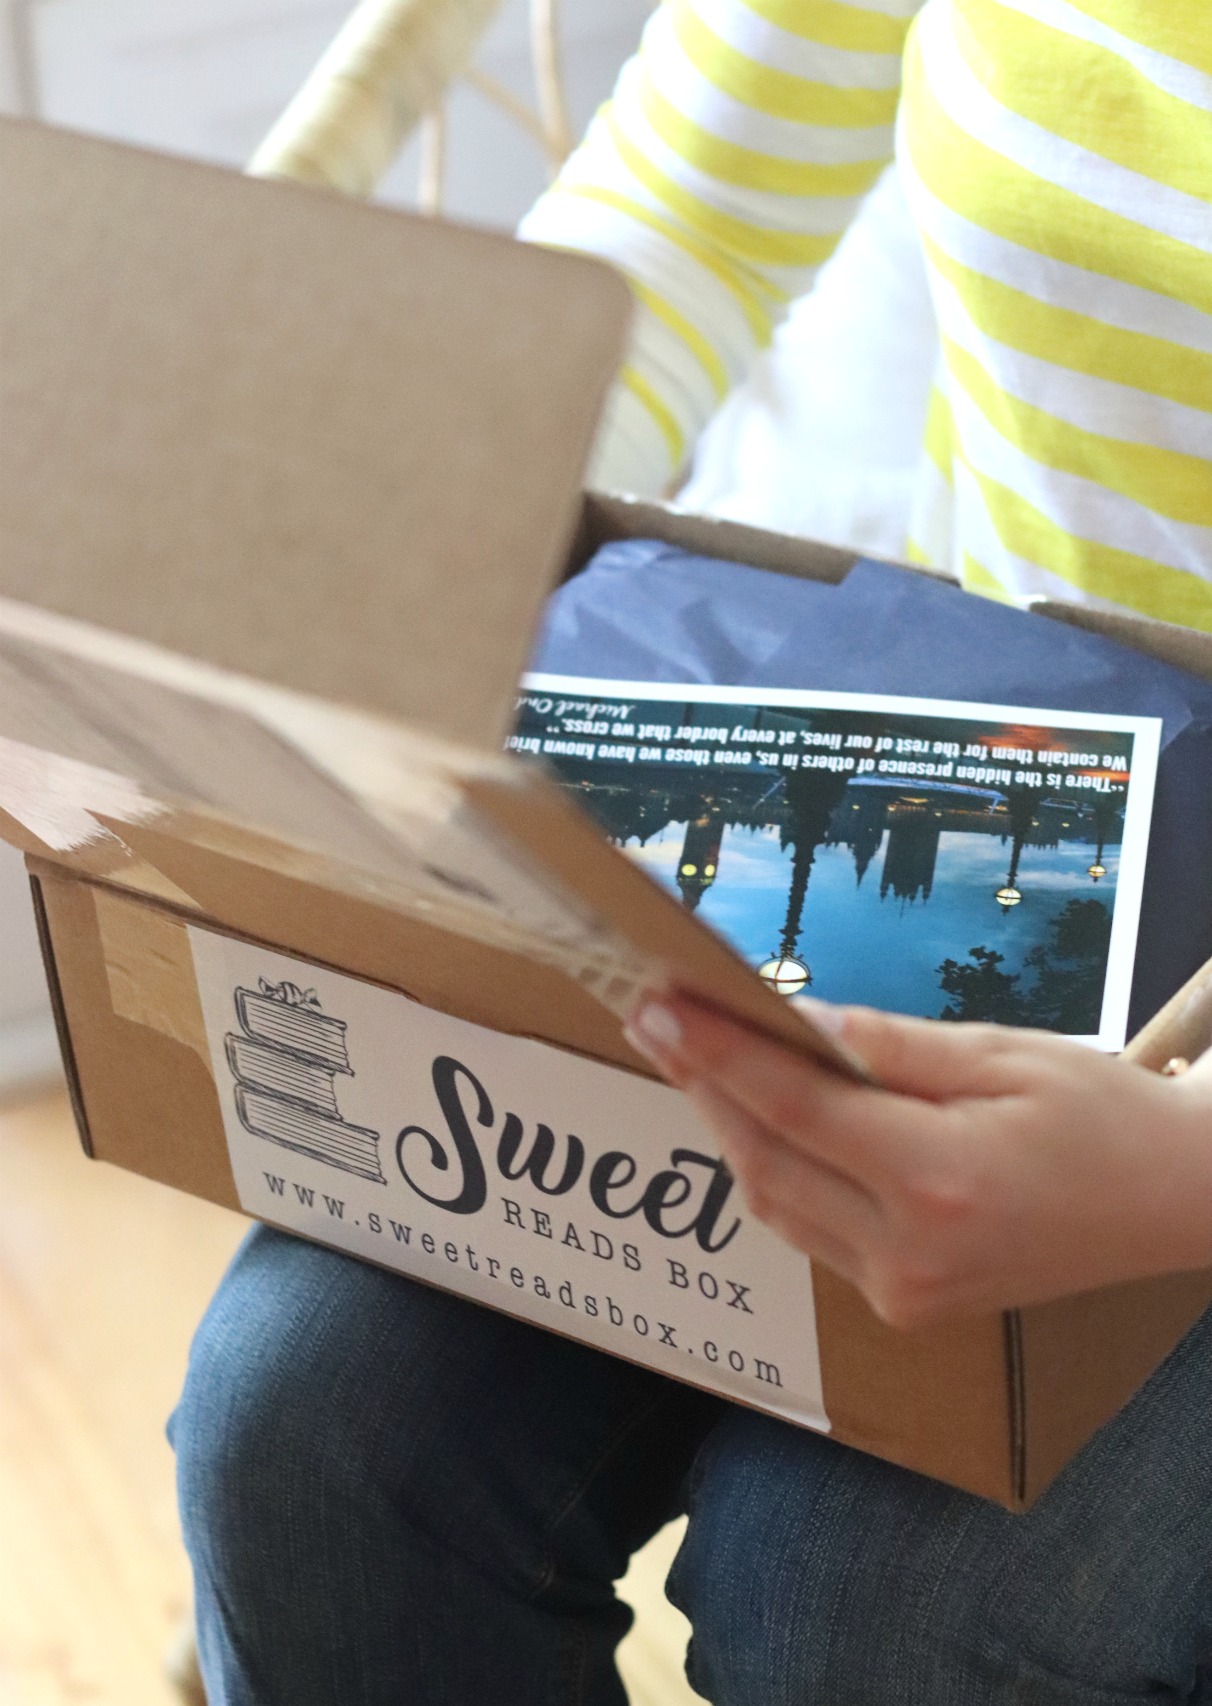 Sweet Reads Box July 2019 opening box featured image